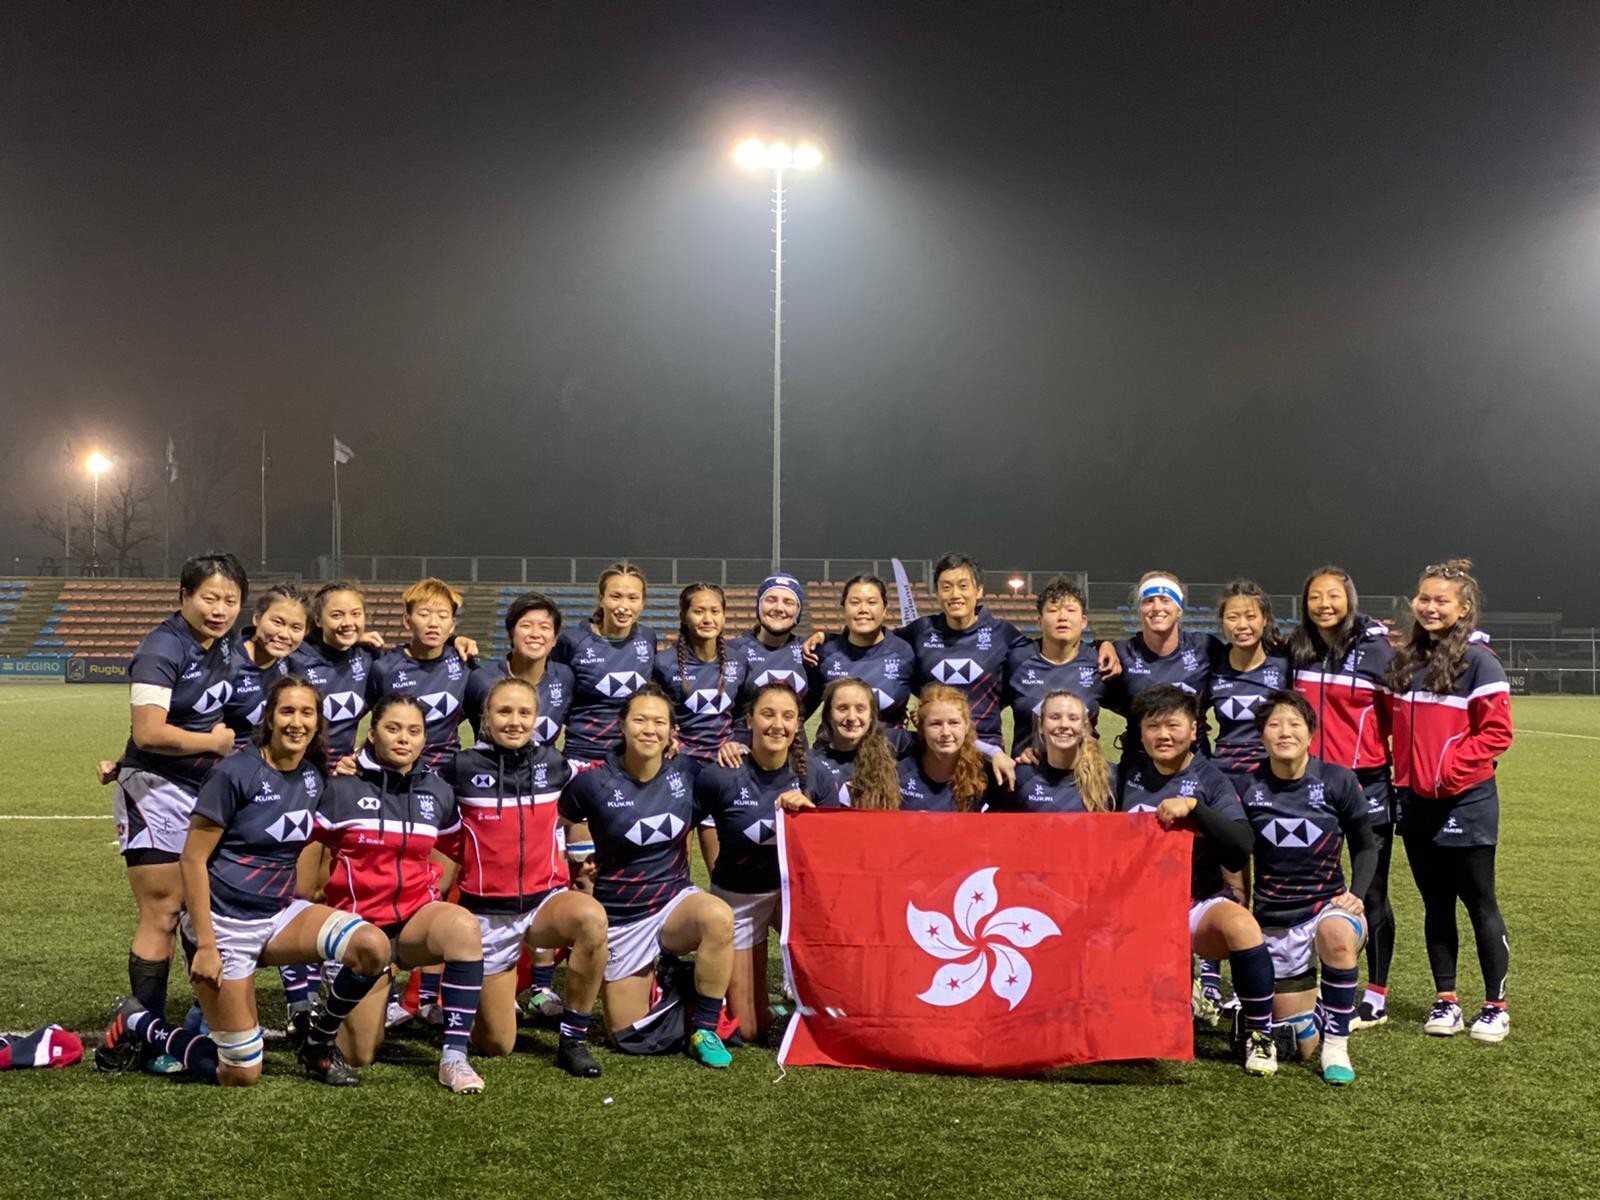 Hong Kong’s women’s 15s team after their first game in Holland. Photo: HKRU